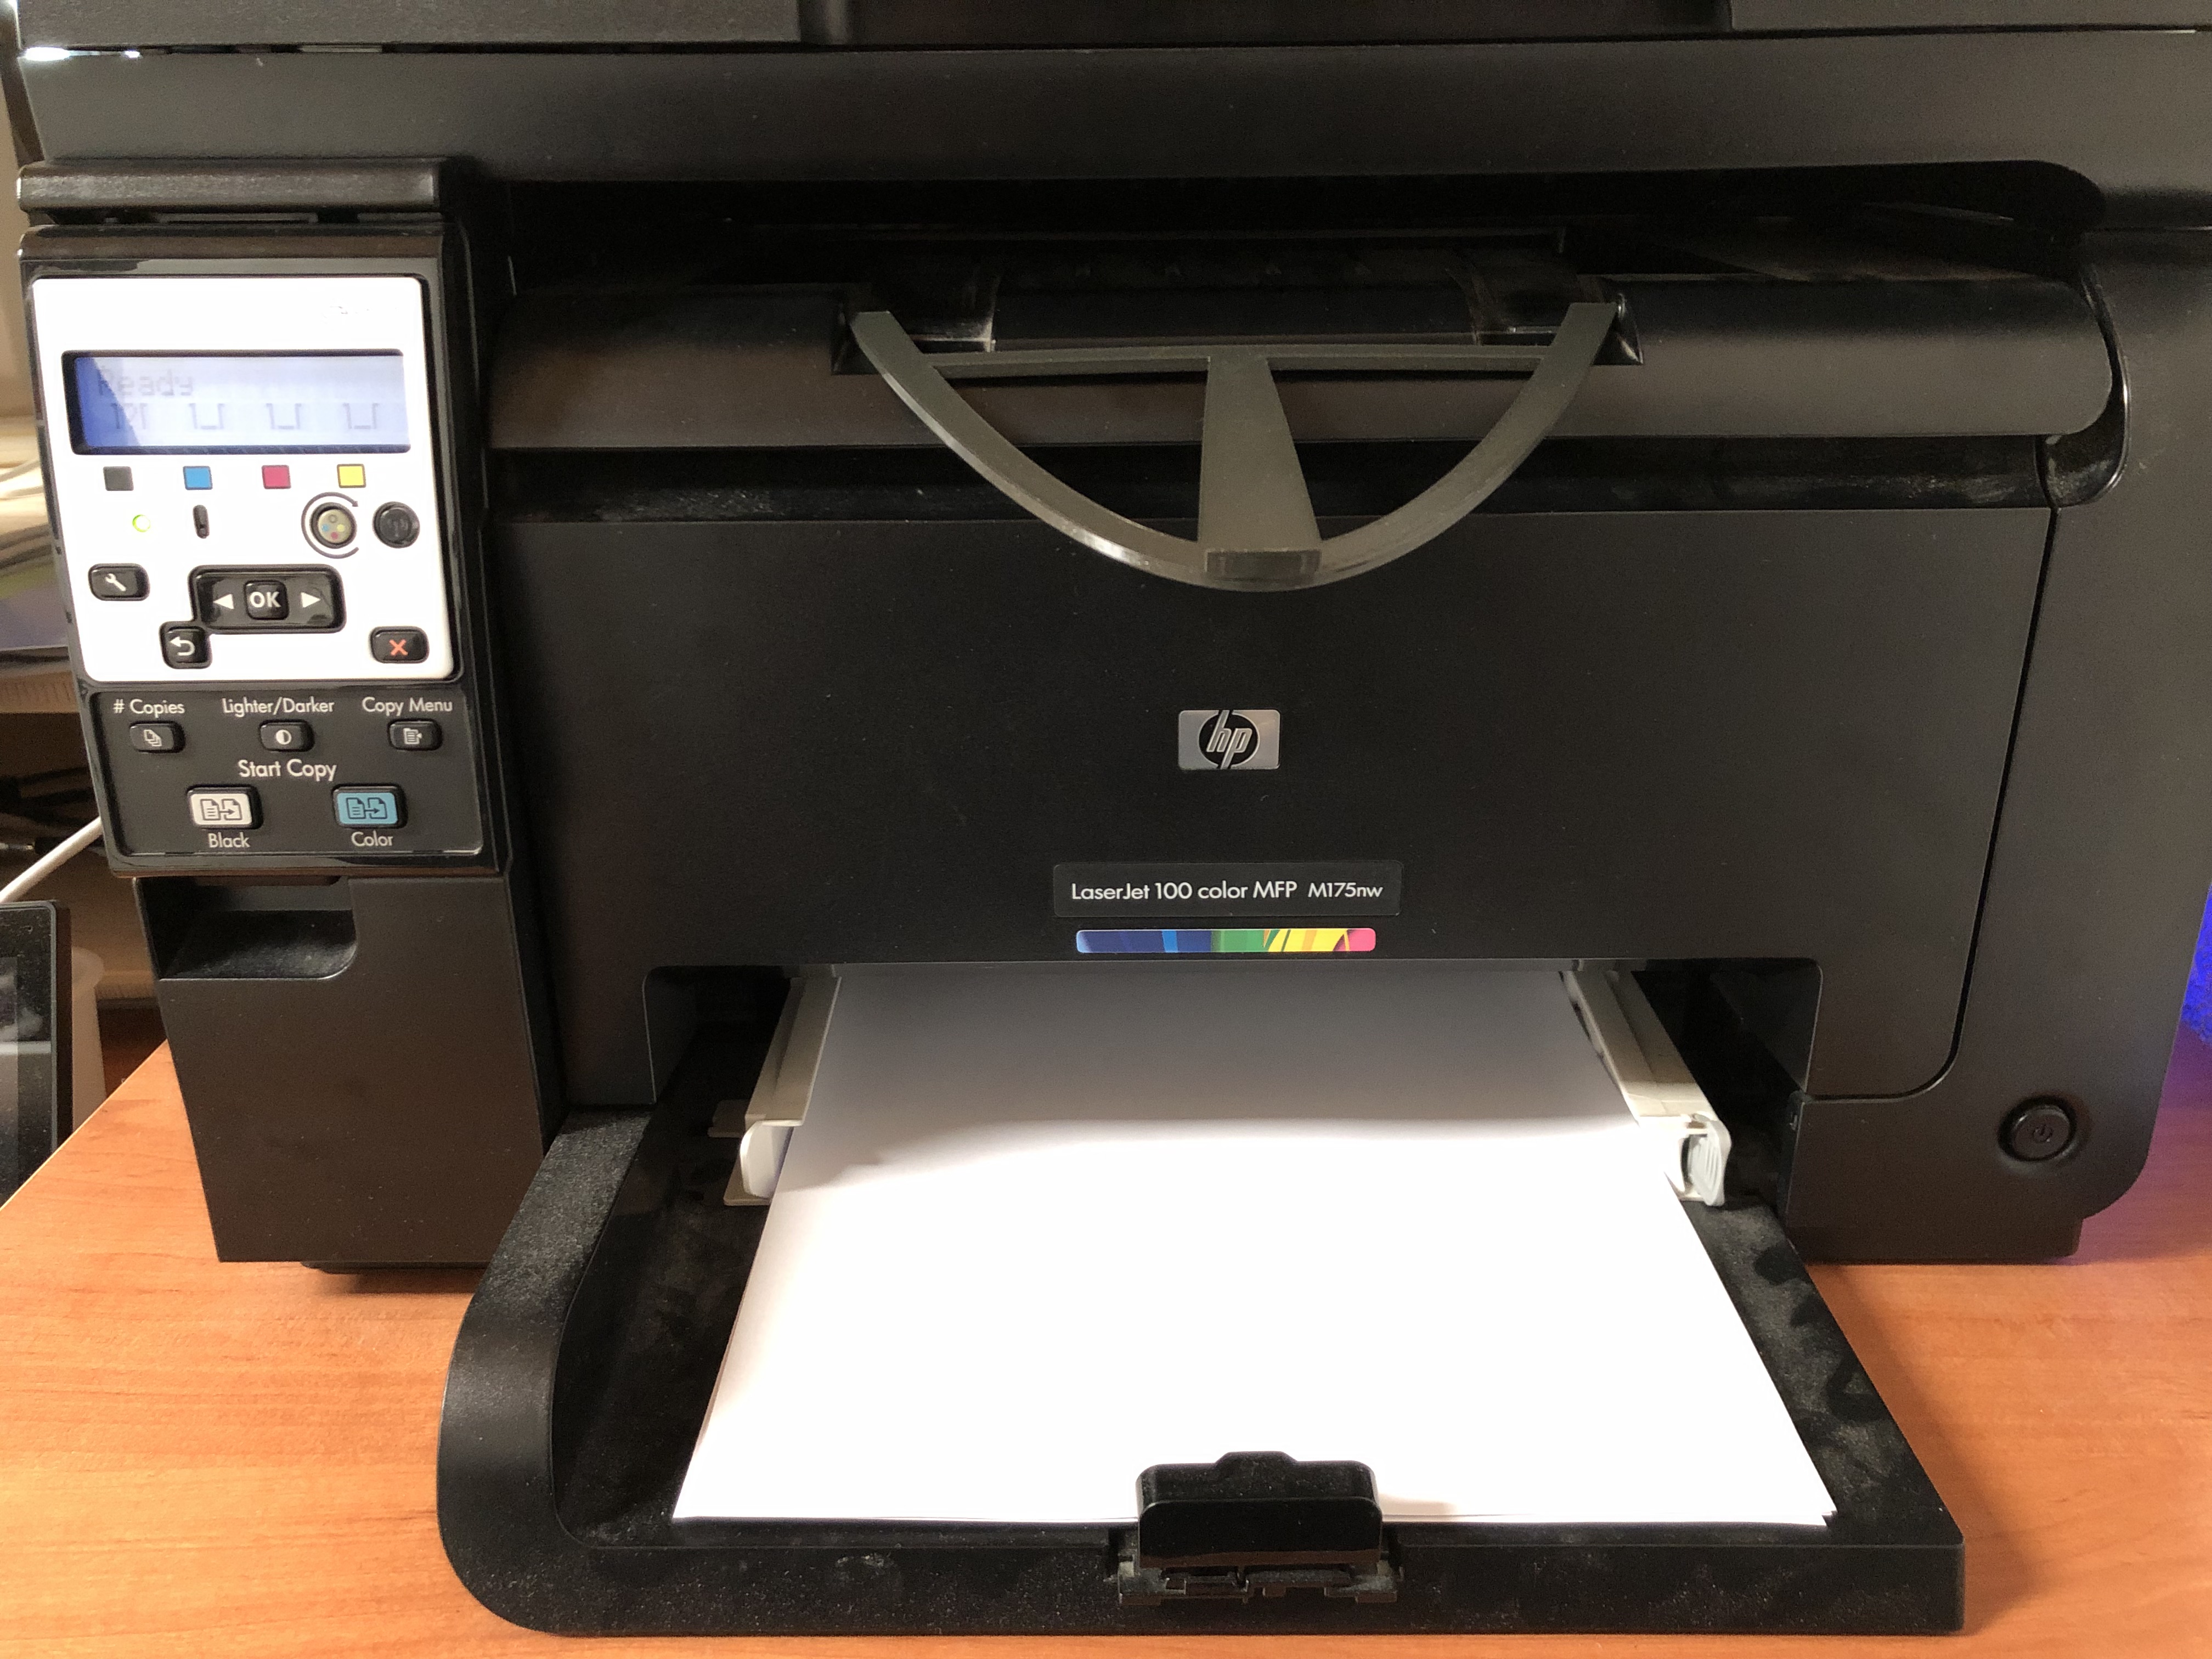 HP M175nw paper delivery tray